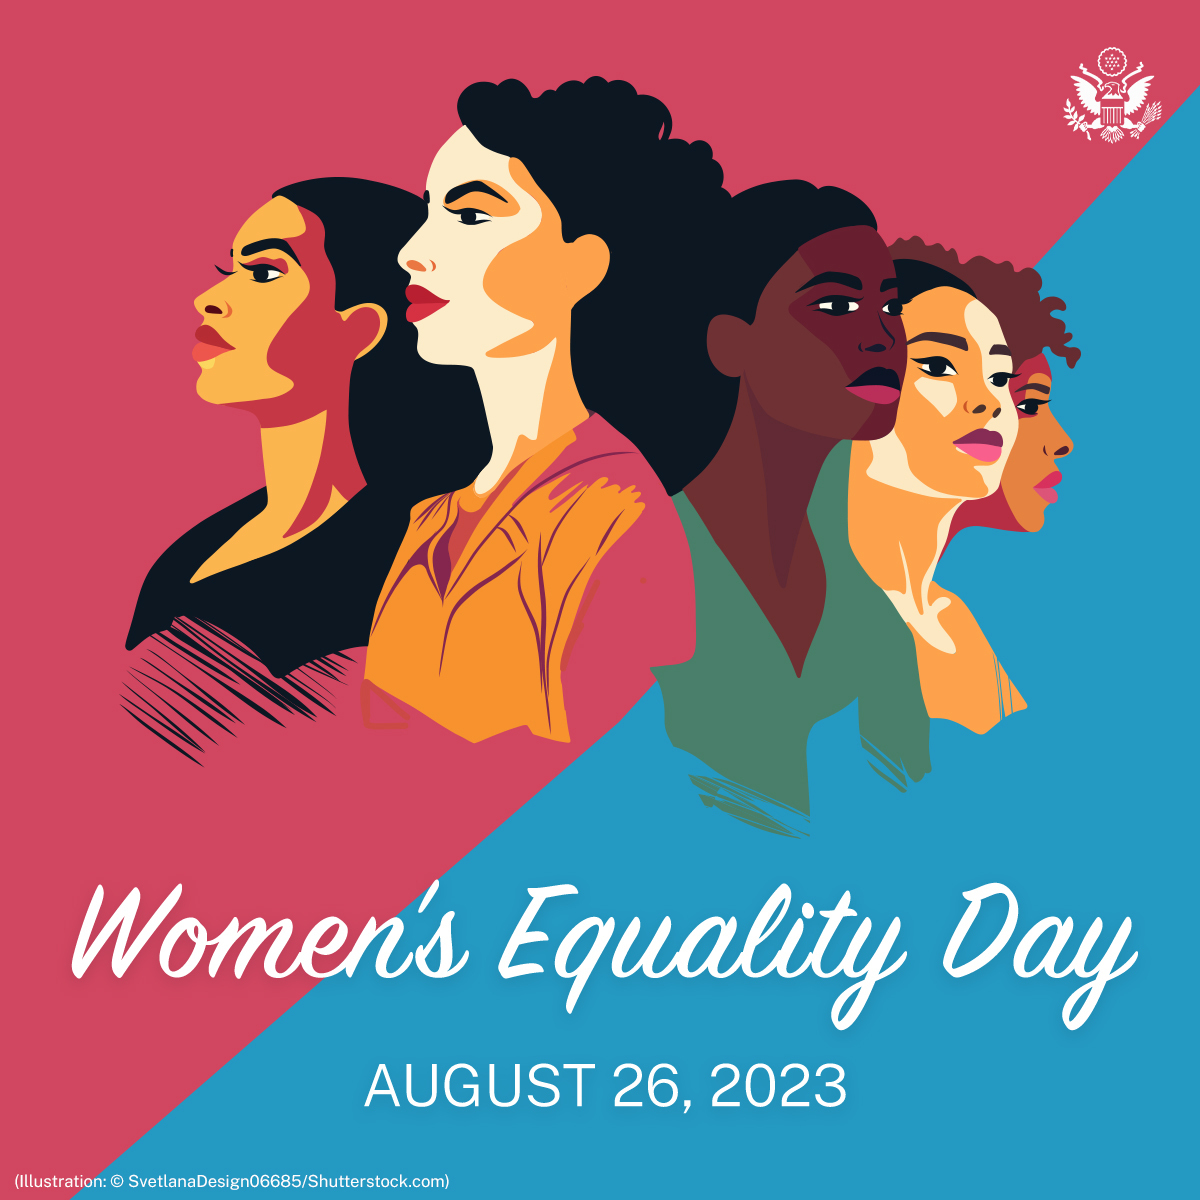 Today, we honor those who continue to fight for women to have the same rights as men, in the U.S. and worldwide. Women's rights are human rights and advancing gender equity is fundamental to creating a better world.